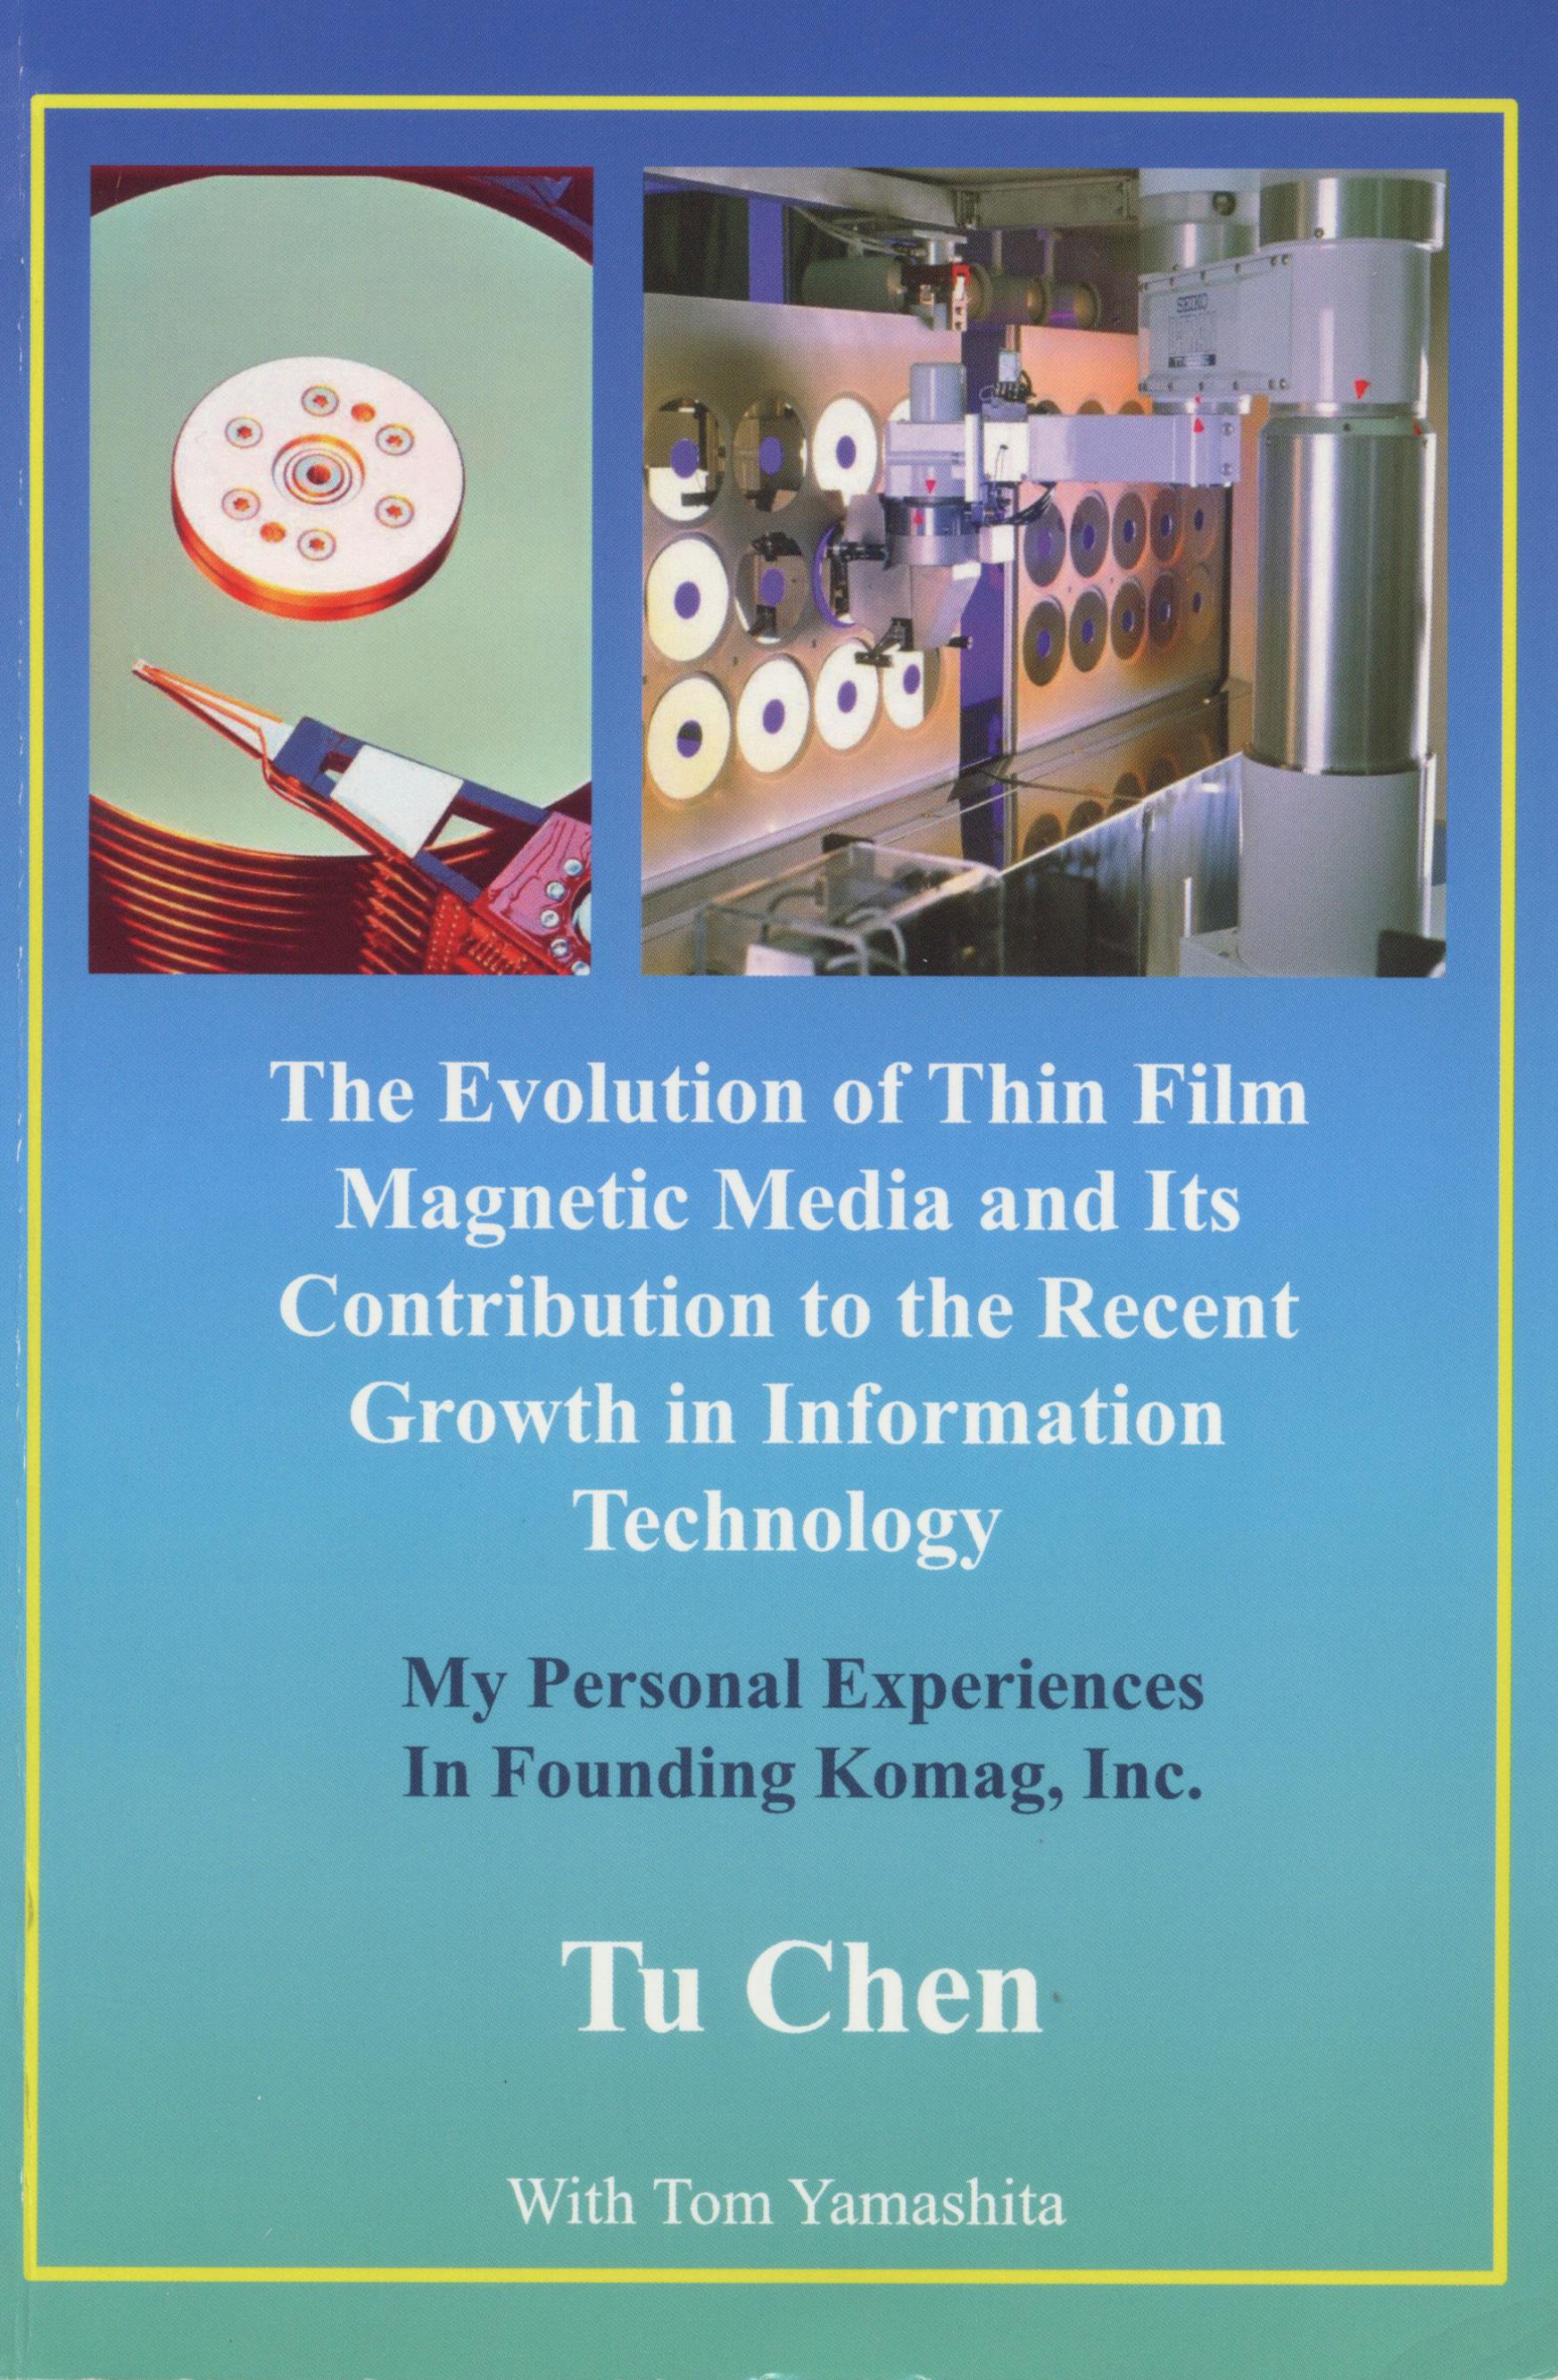 1296. The Evolution of Thin Film Magnetic Media and Its Contribution to the Recent Growth in Information Technology/Tu Chen/2013